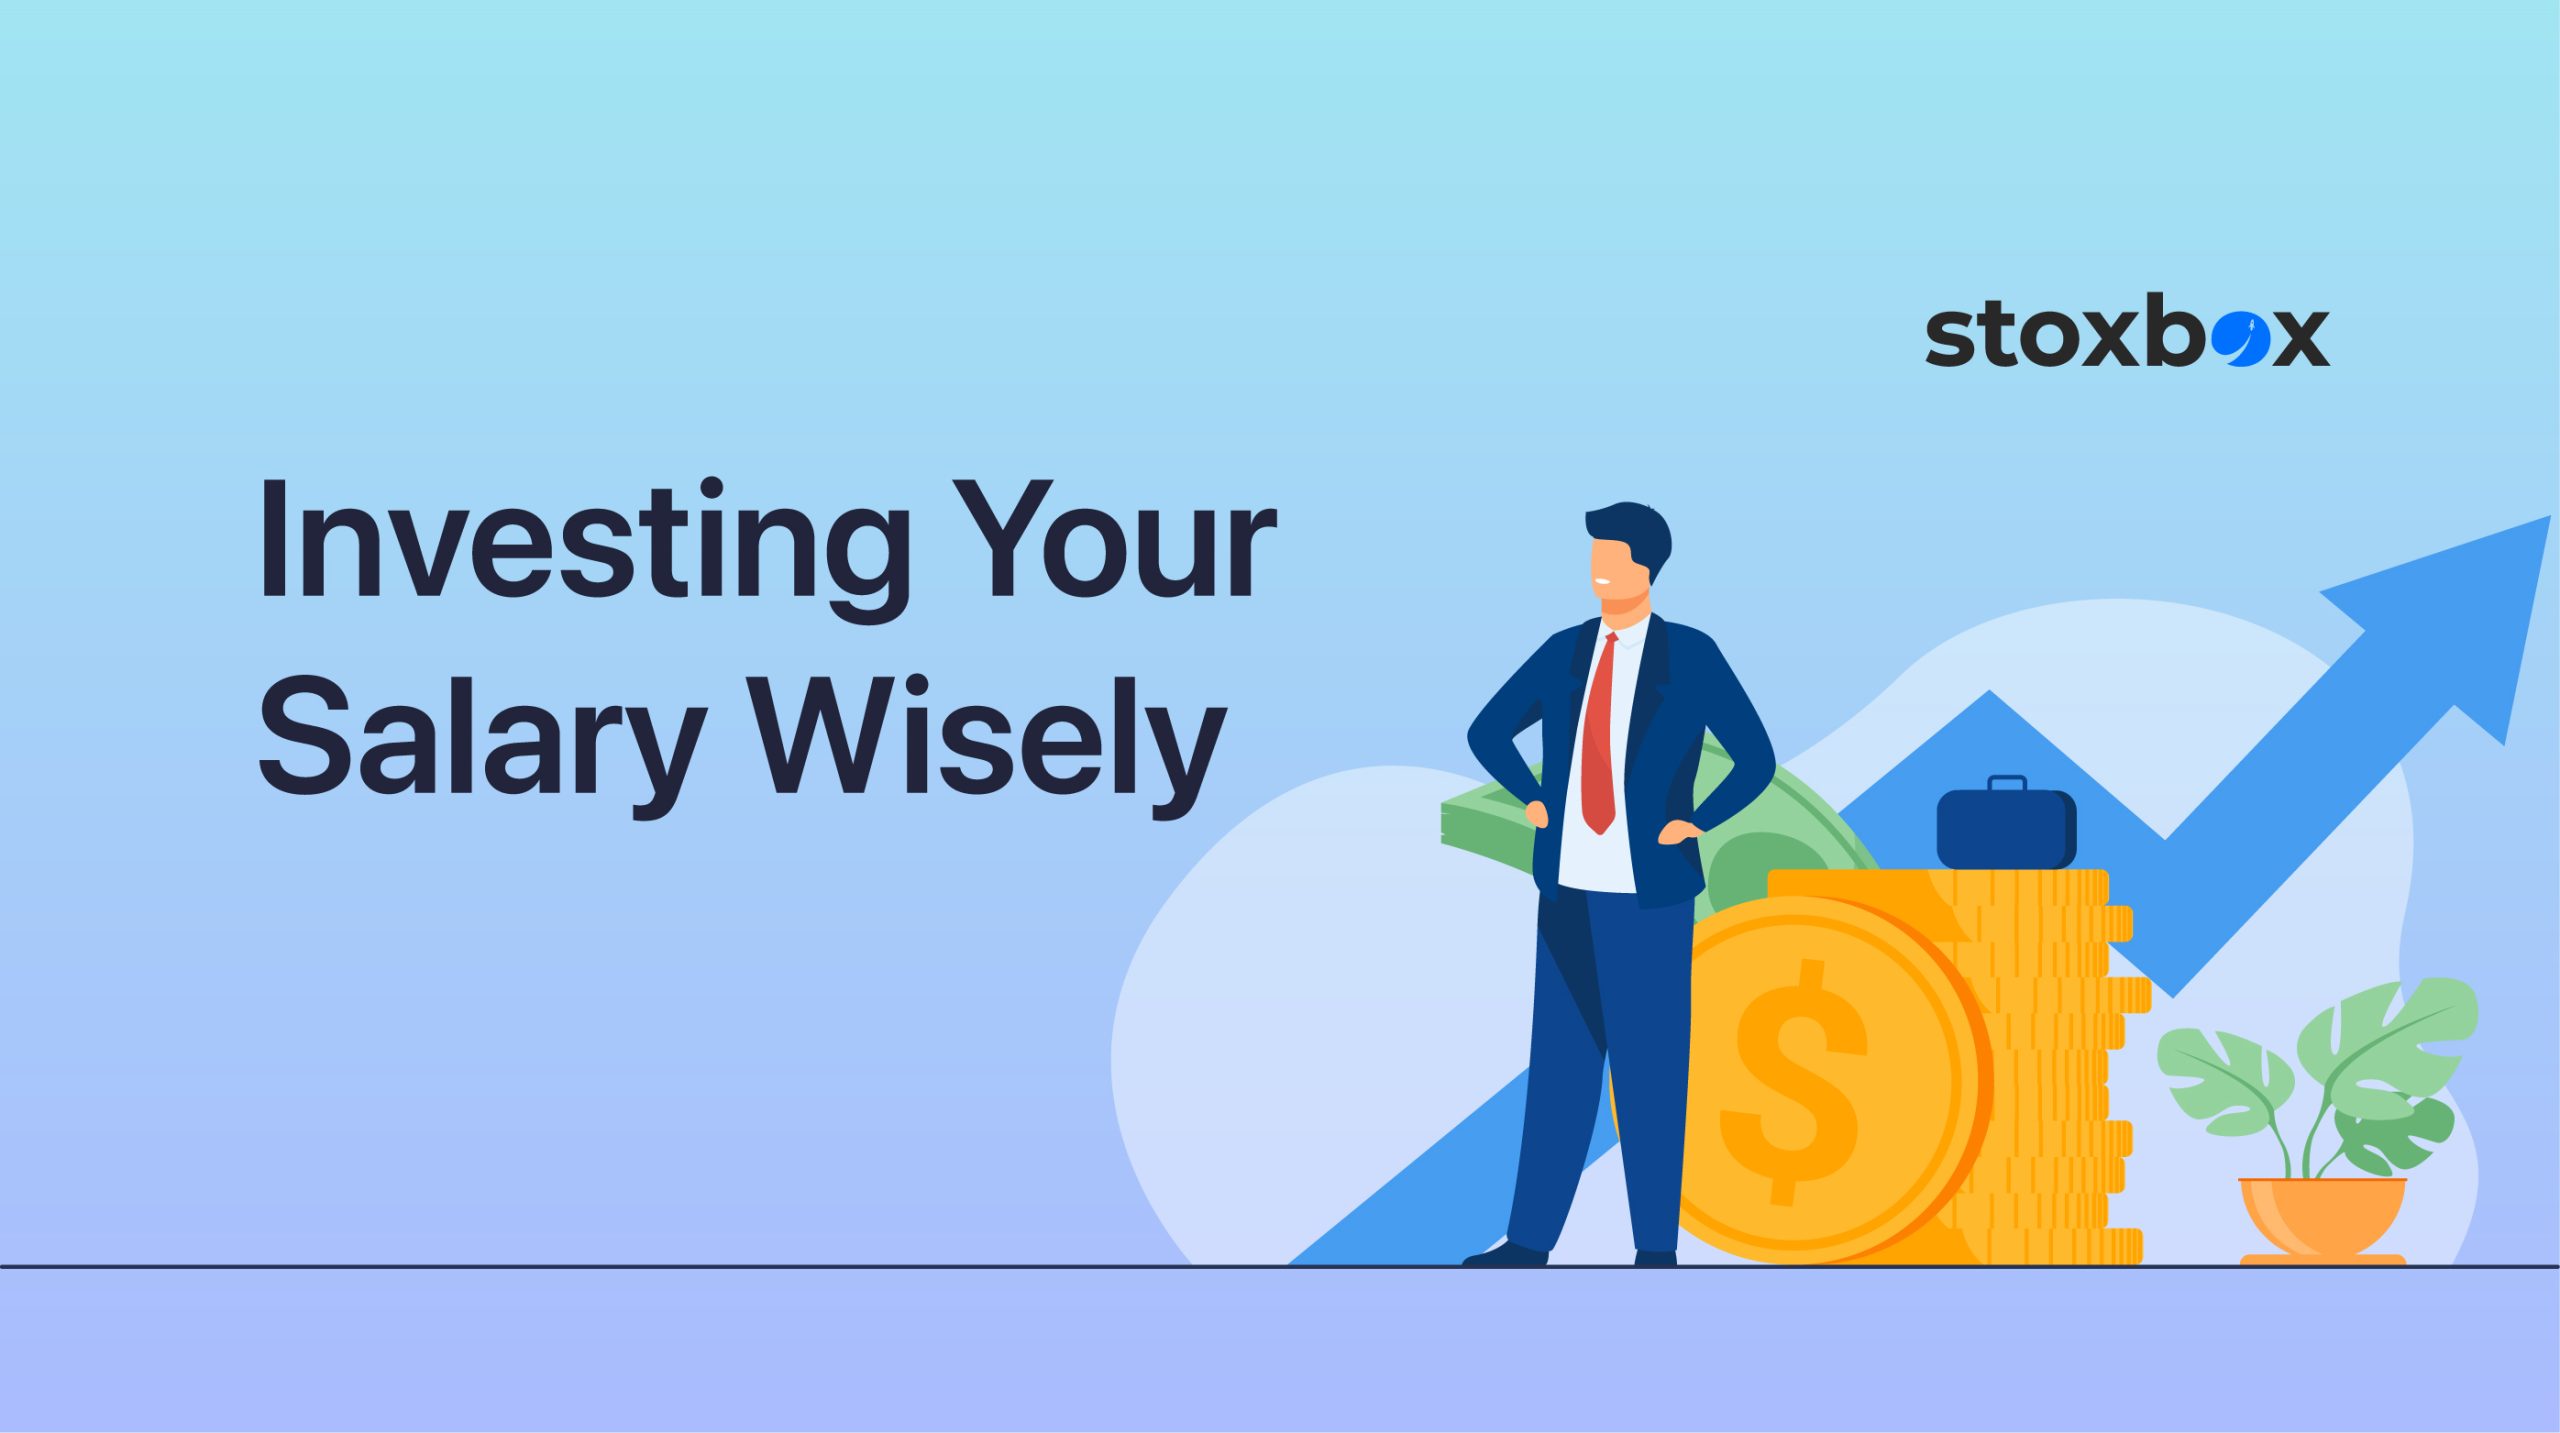 Investing your salary wisely